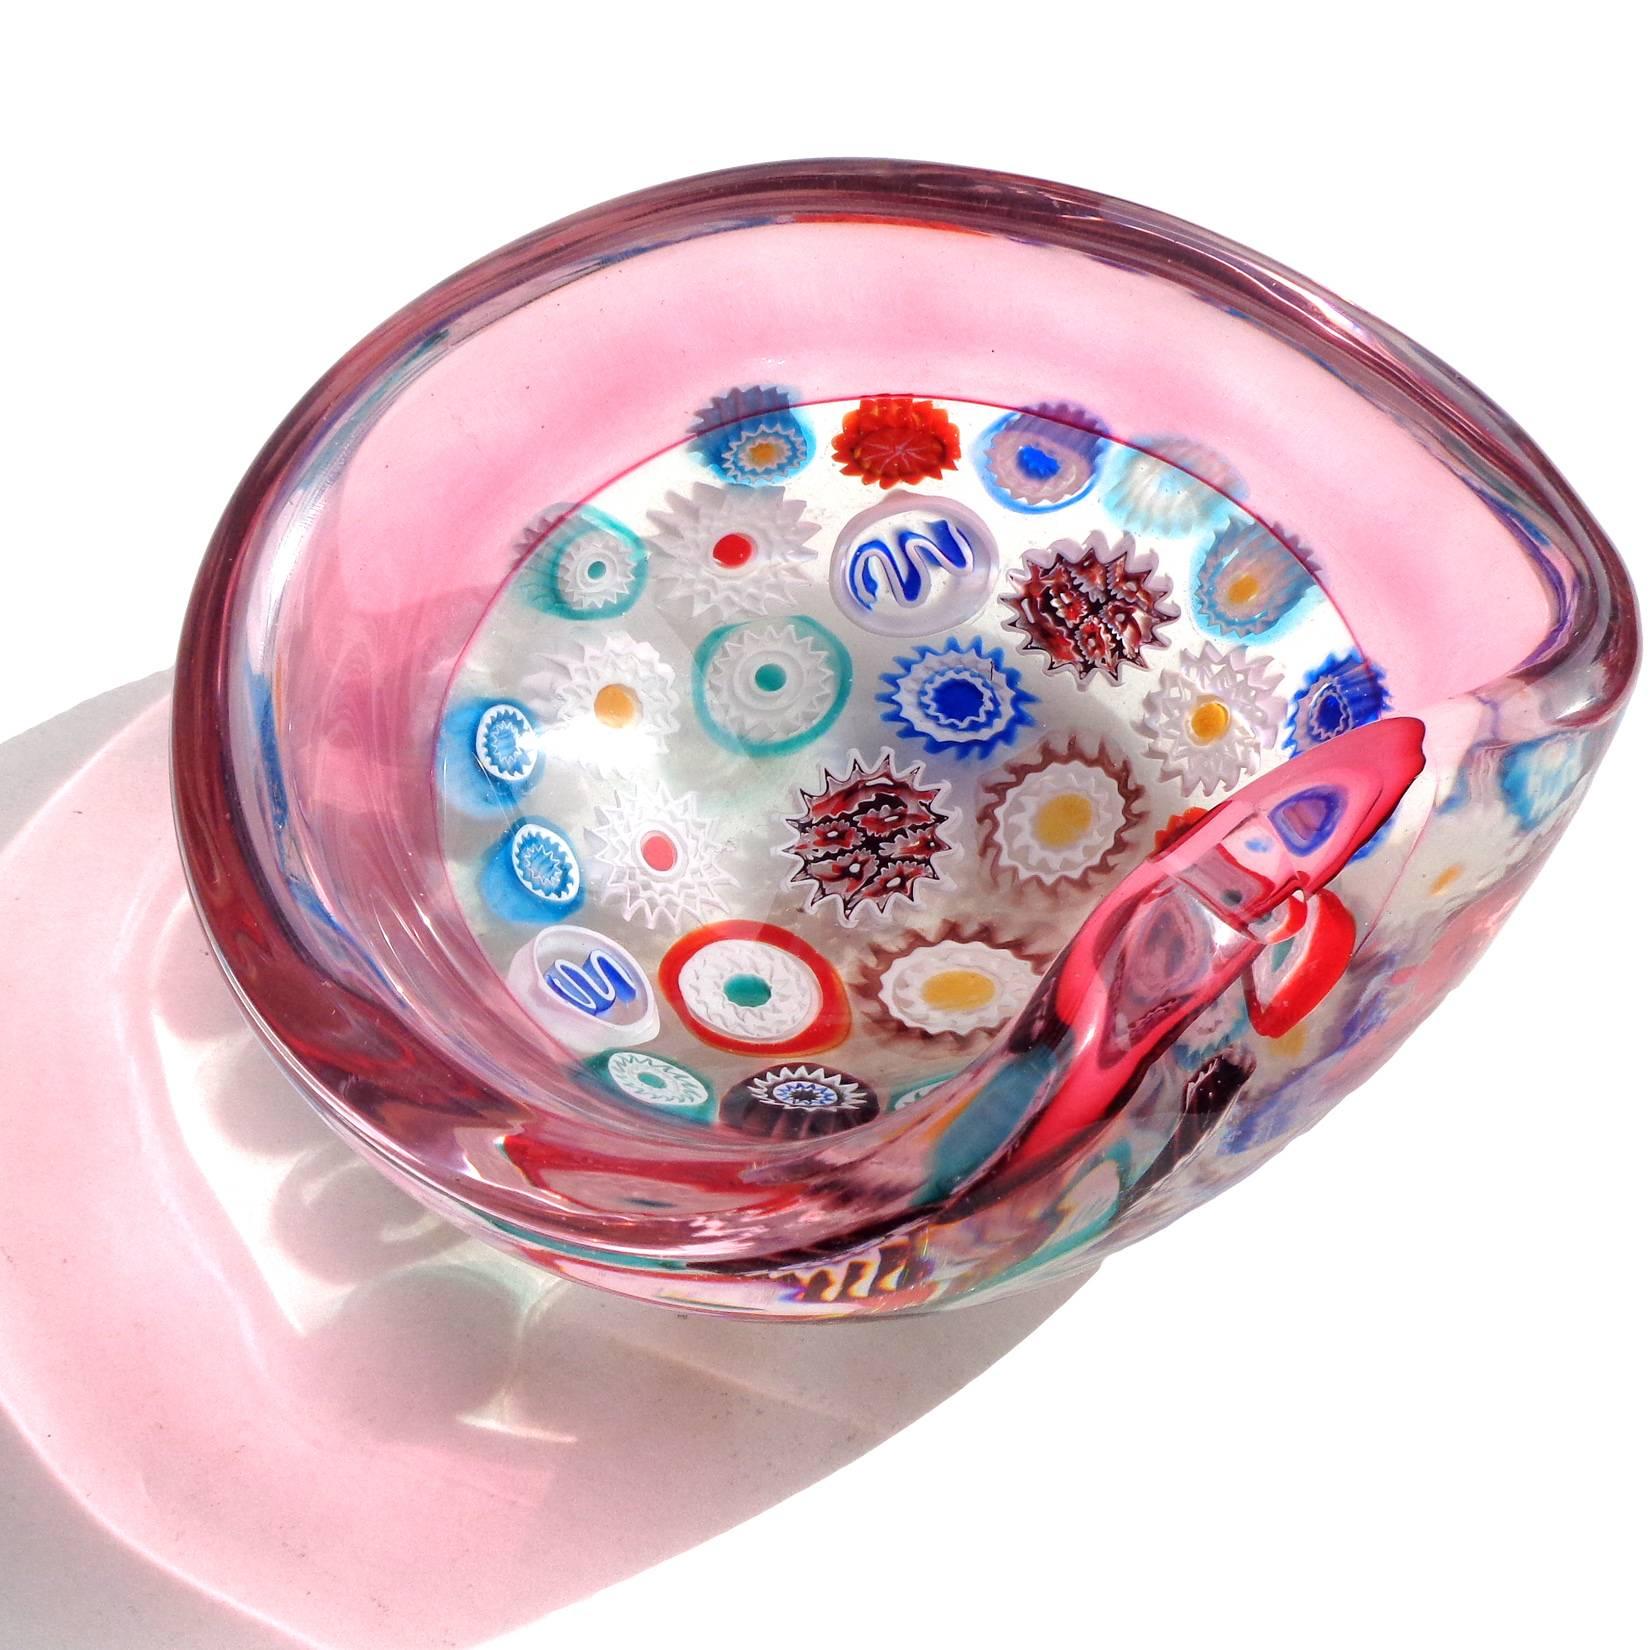 Beautiful and rare Murano hand blown Millefiori canes and Incalmo rim Italian art glass ashtray. Documented to designer Archimede Seguso. The piece has a cut indent on the rim for cigarettes. Will be listing more from my personal collection in